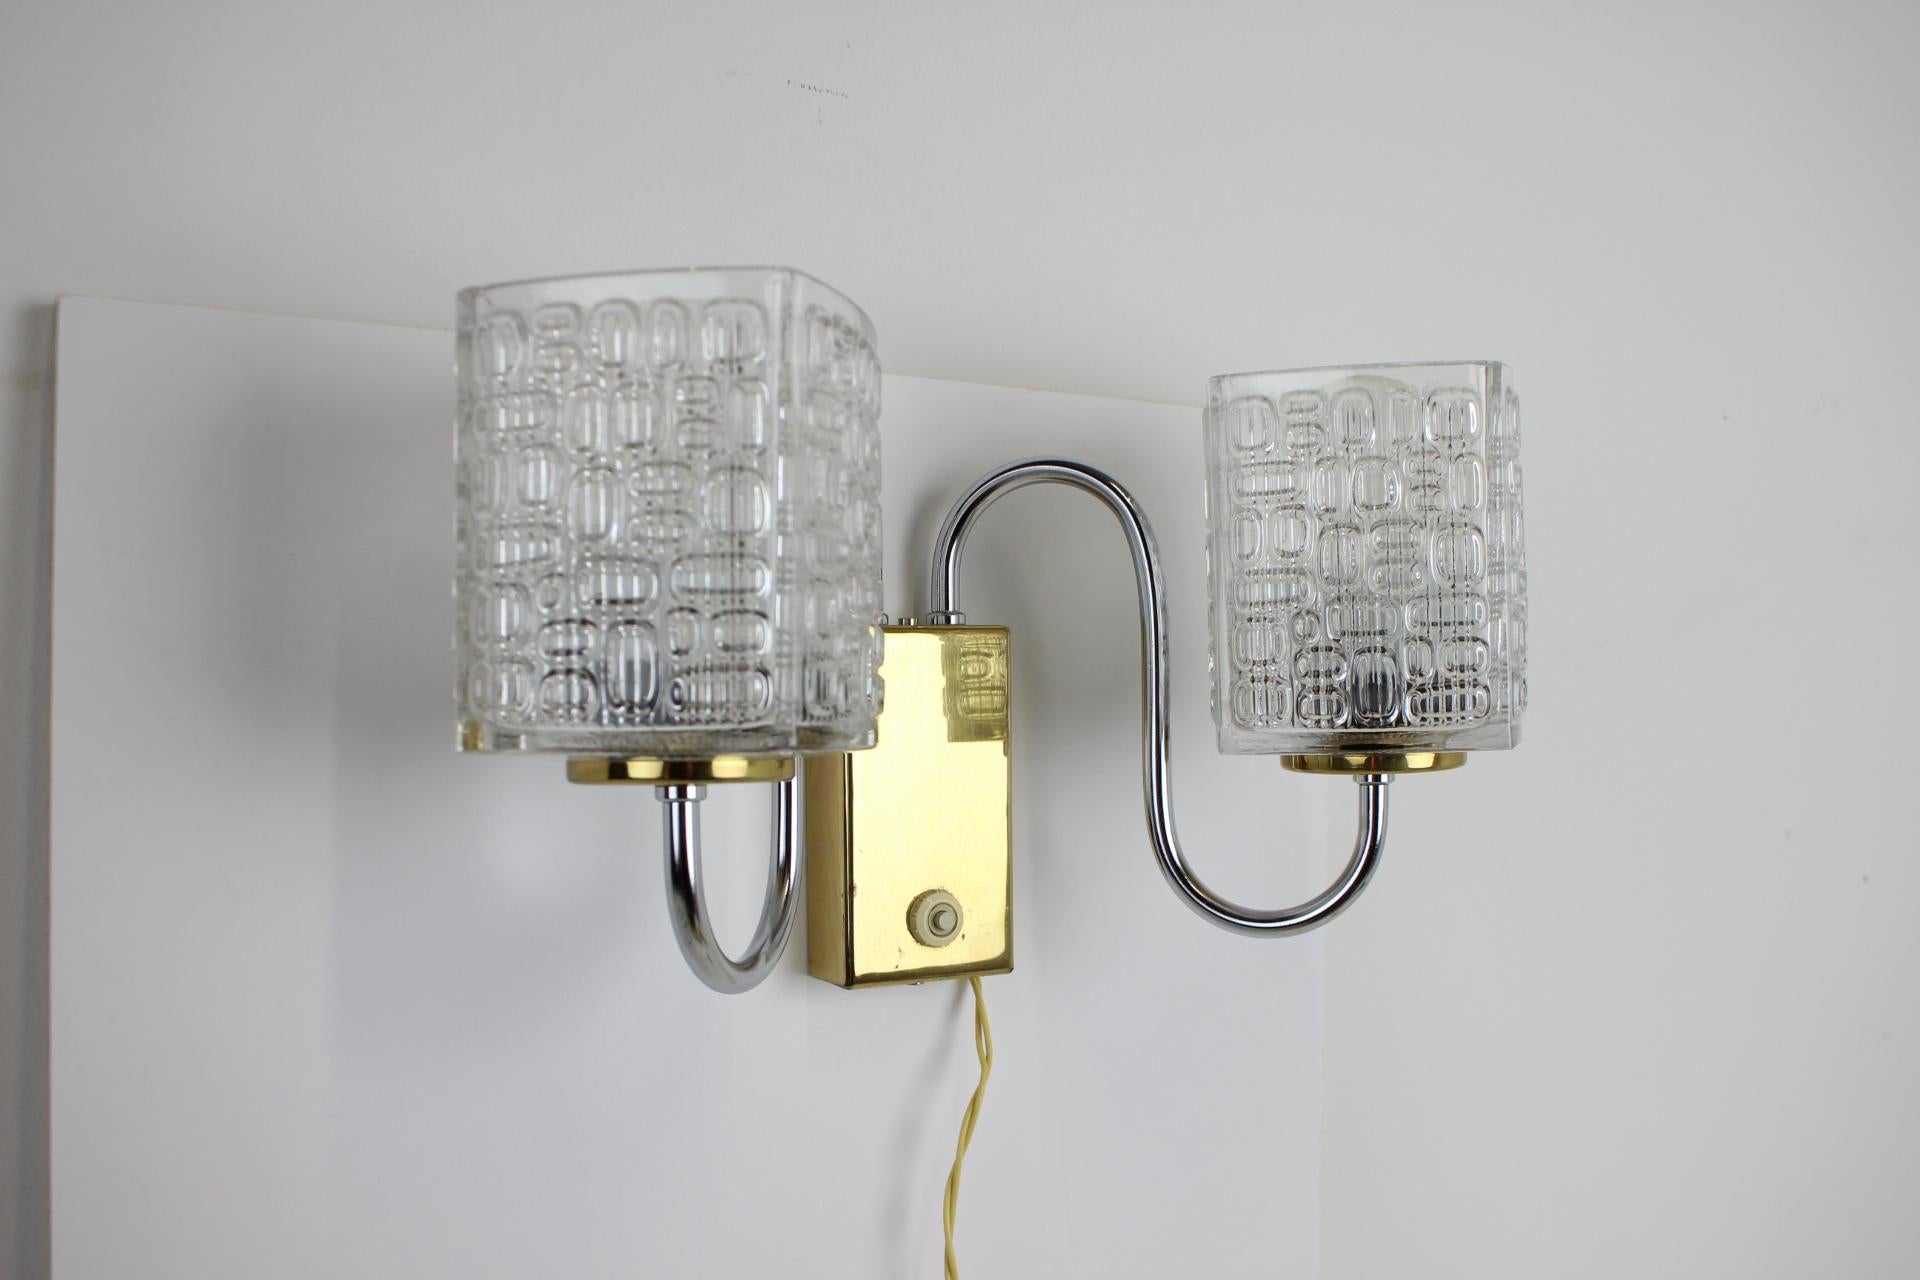 Made in Czechoslovakia
Made of glass, chrome, brass
New wiring was installed
With aged patina
2xE27 or E26 bulb
Original condition
US wiring compatible.